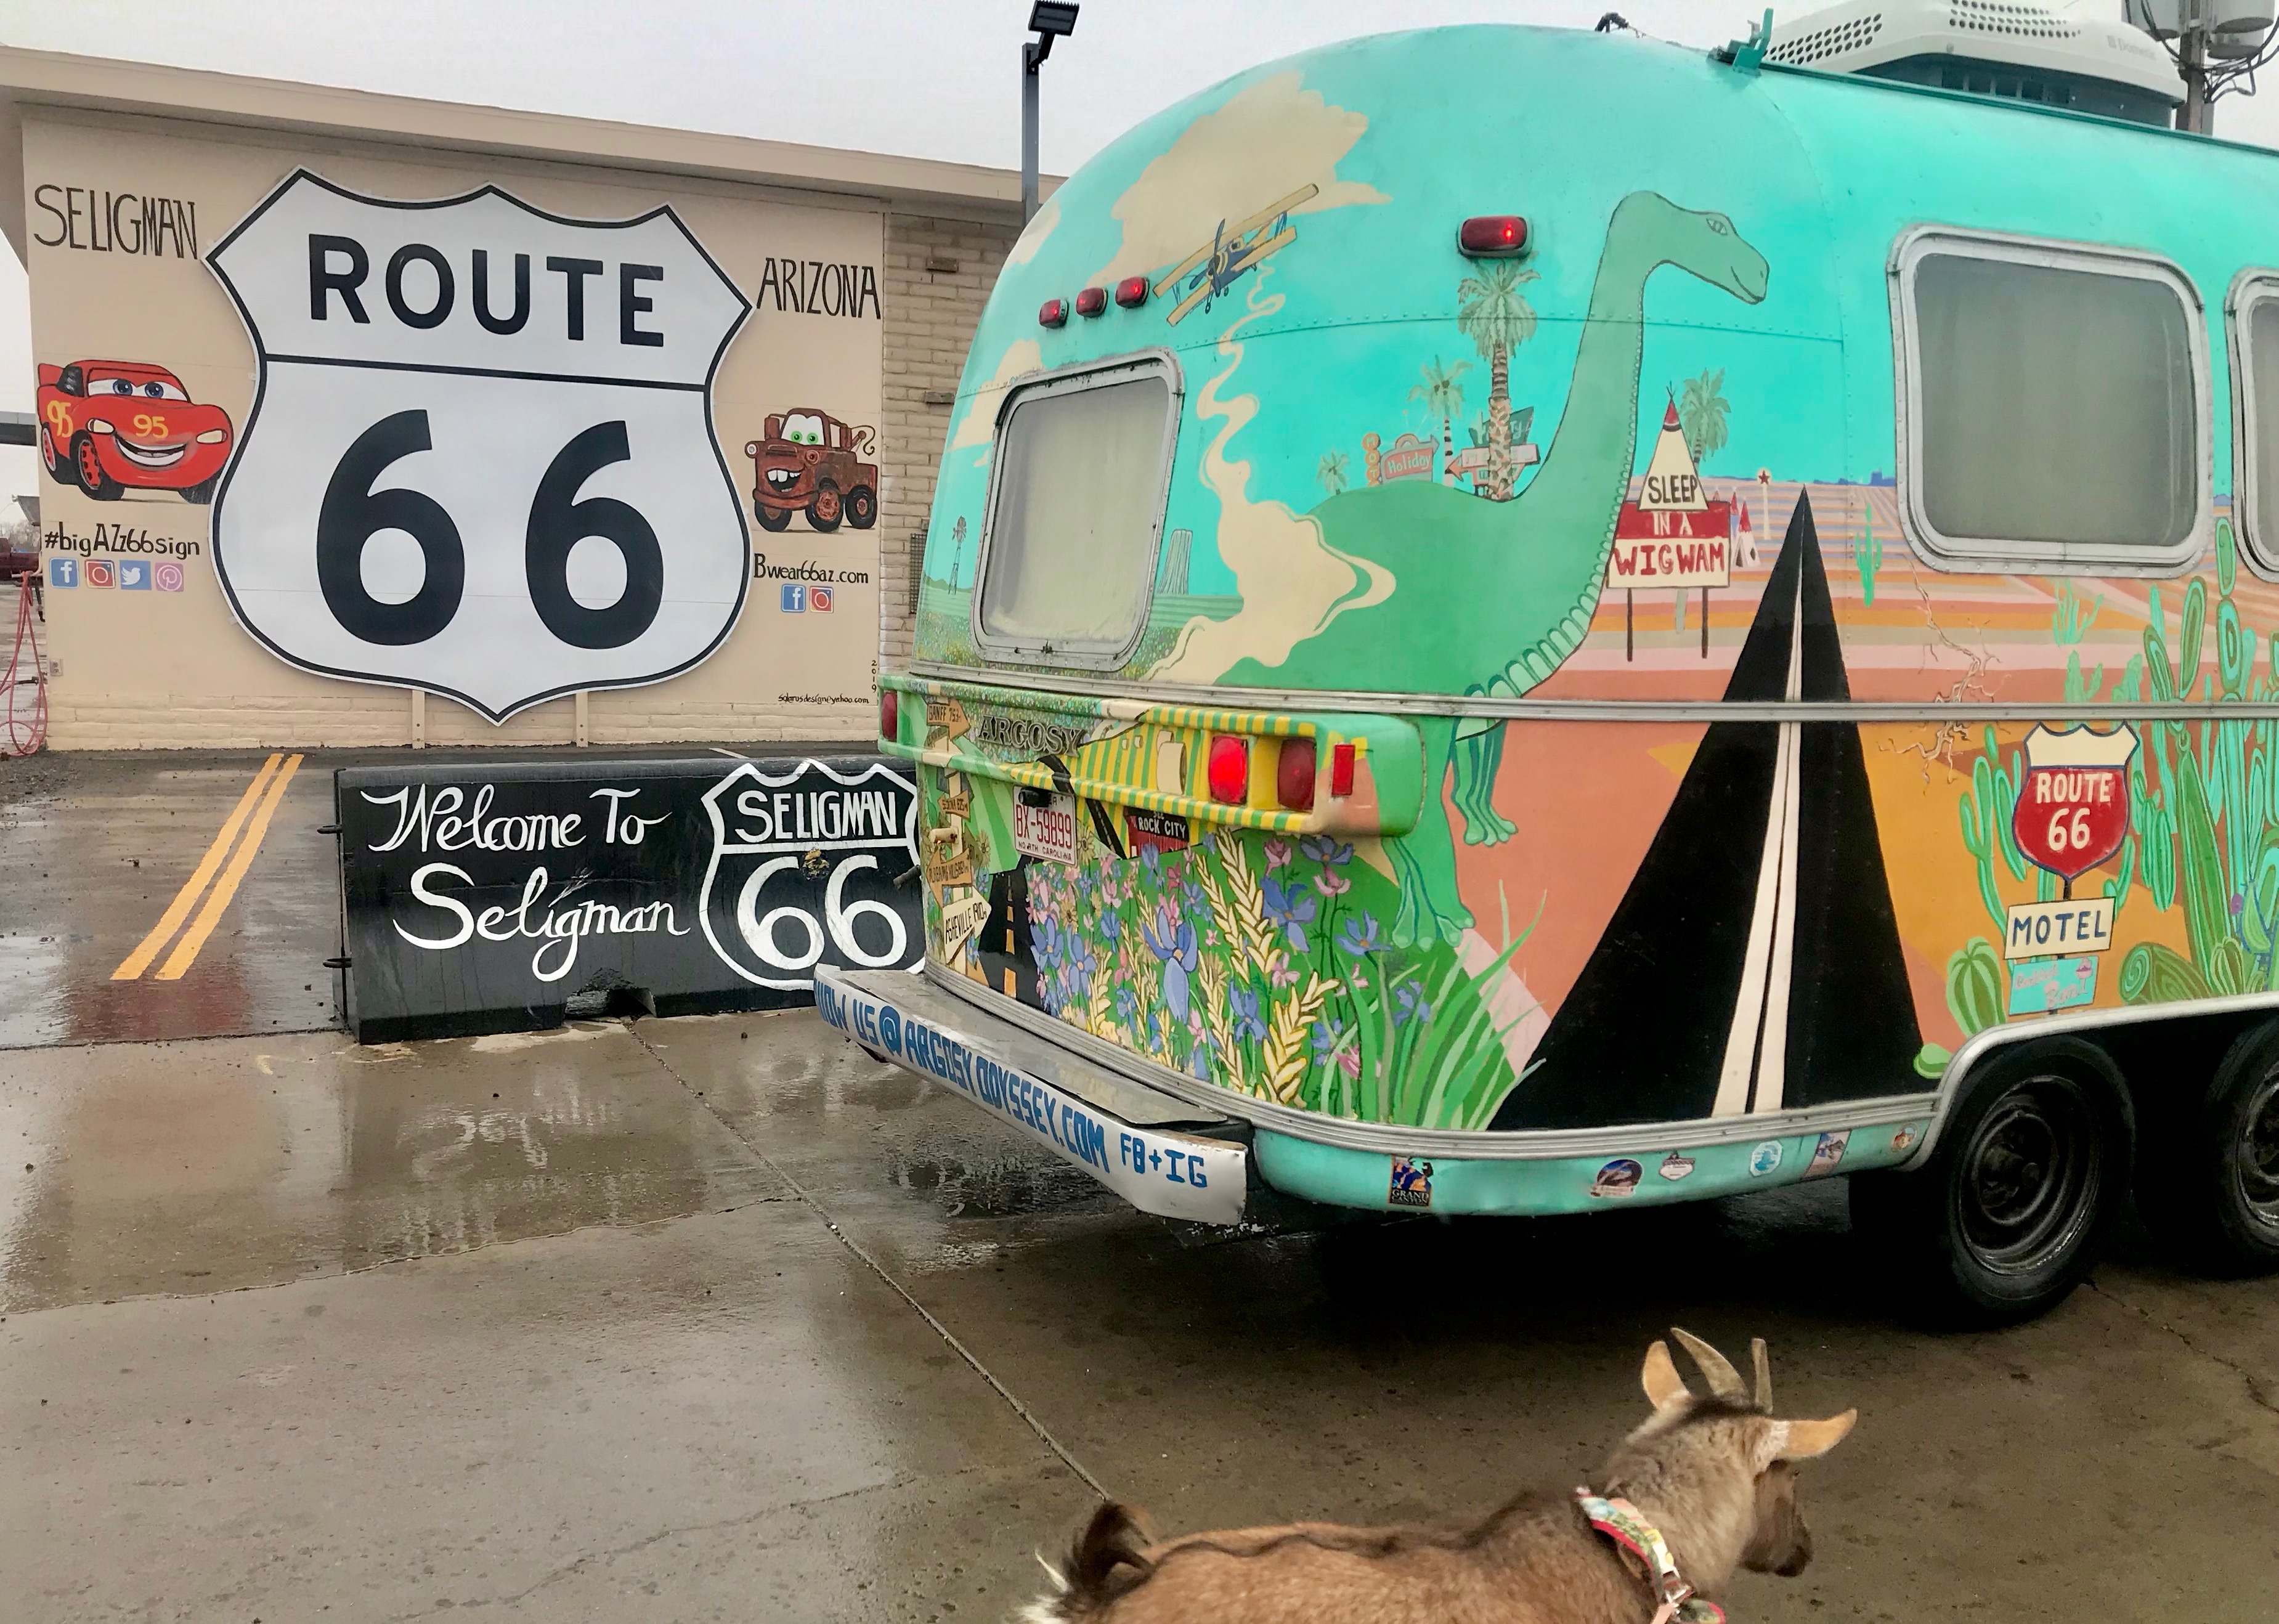 A colorful Airstream trailer parked near a Route 66 sign with goat in foreground.